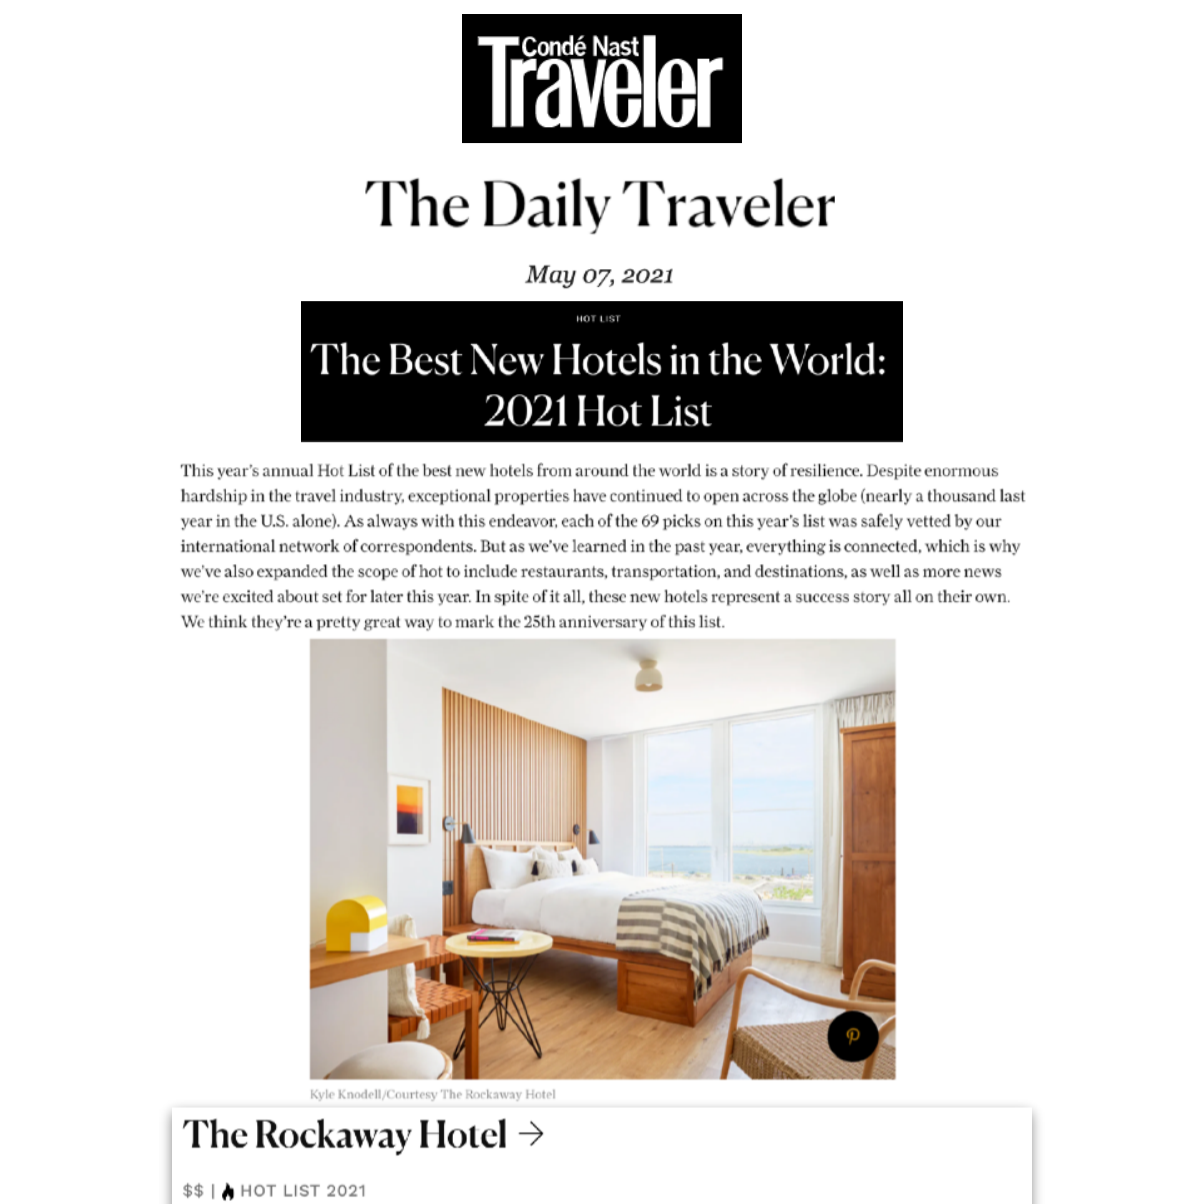 Article from The Traveler about The Rockaway Hotel